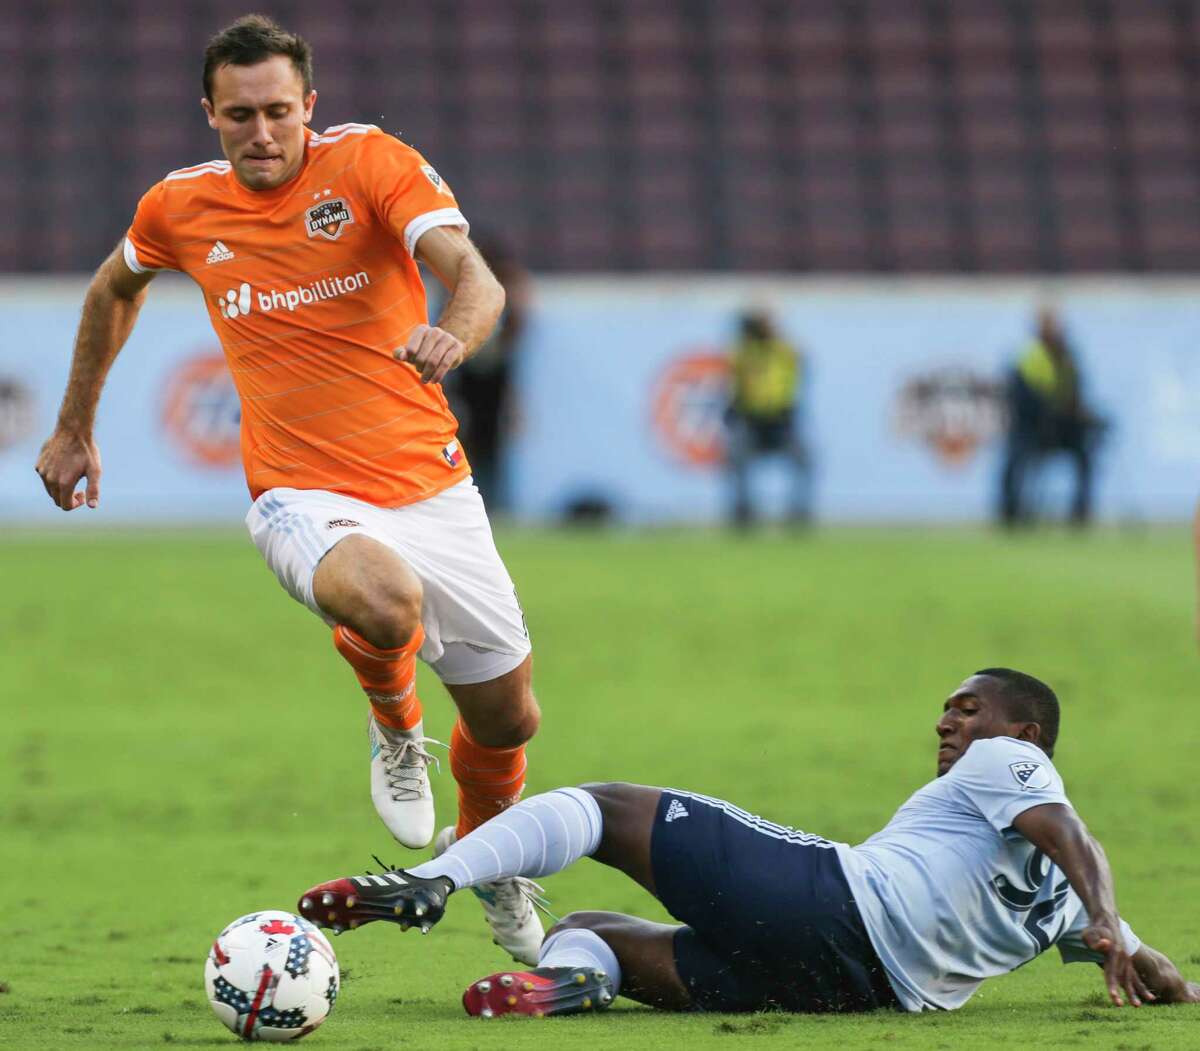 Houston Dynamo forward Andrew Wenger (11) dribbles pass a tackle by Sporting Kansas City midfielder Jimmy Medranda (94) during the first half of the Lamar Hunt U.S. Open Cut Round of 16 game at BBVA Compass Stadium Wednesday, June 28, 2017, in Houston. ( Yi-Chin Lee / Houston Chronicle )